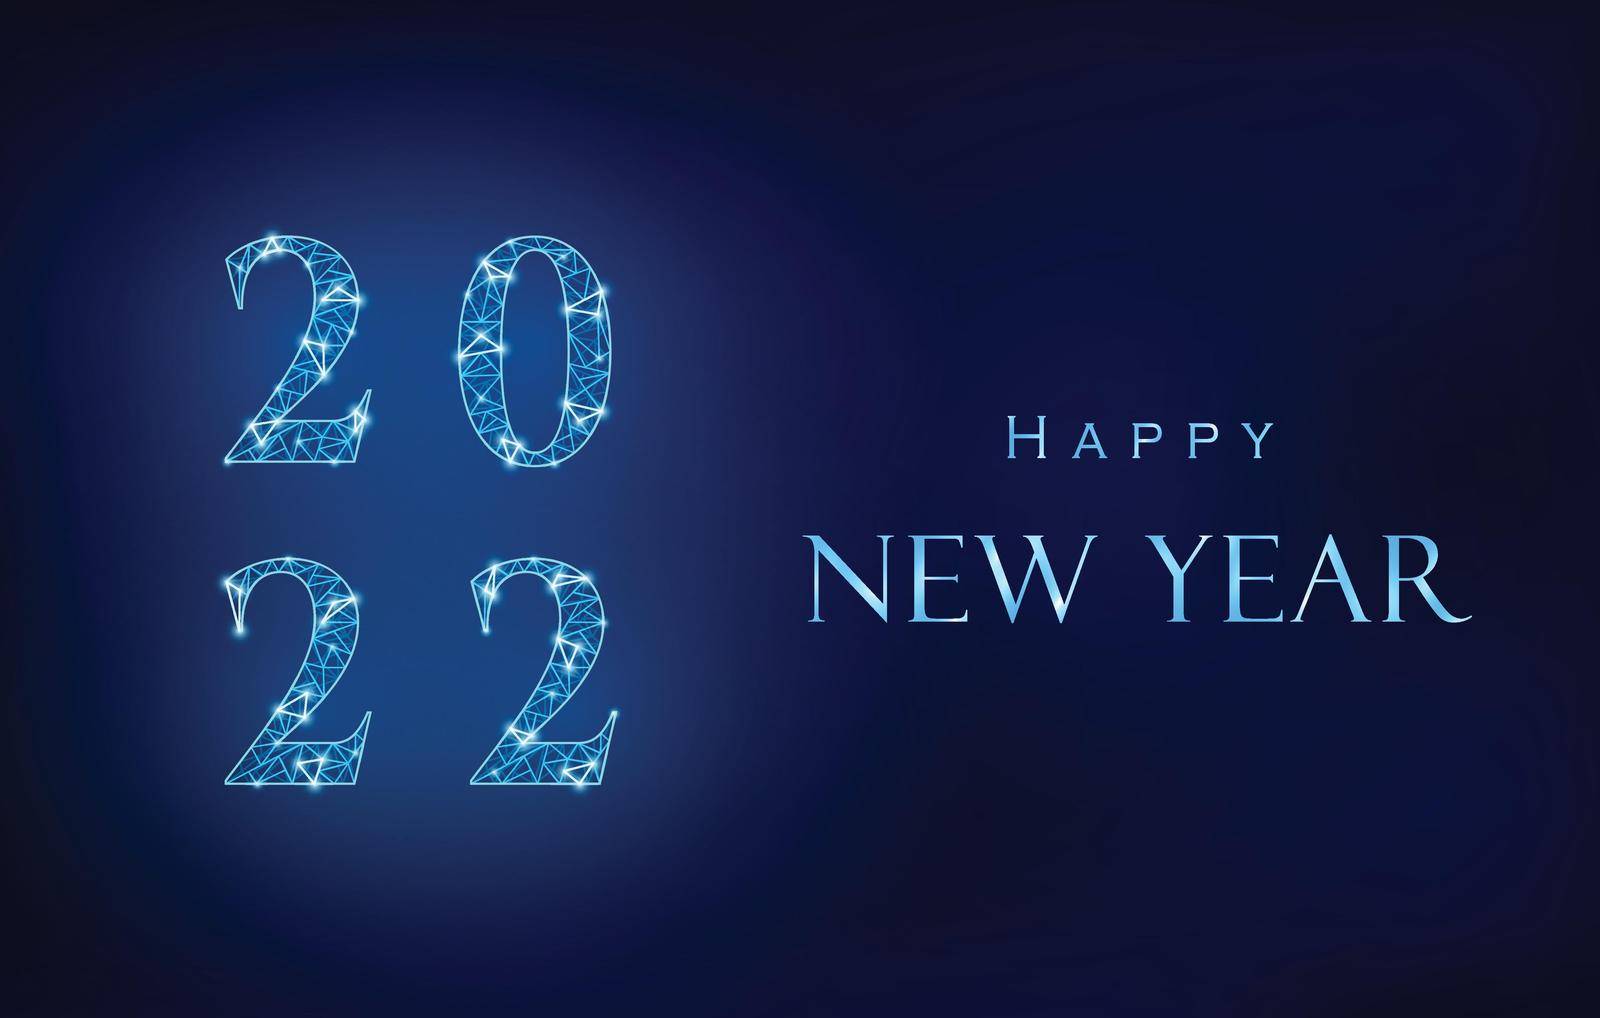 Happy New Year 2022 design with polygon mesh. by GraffiTimi